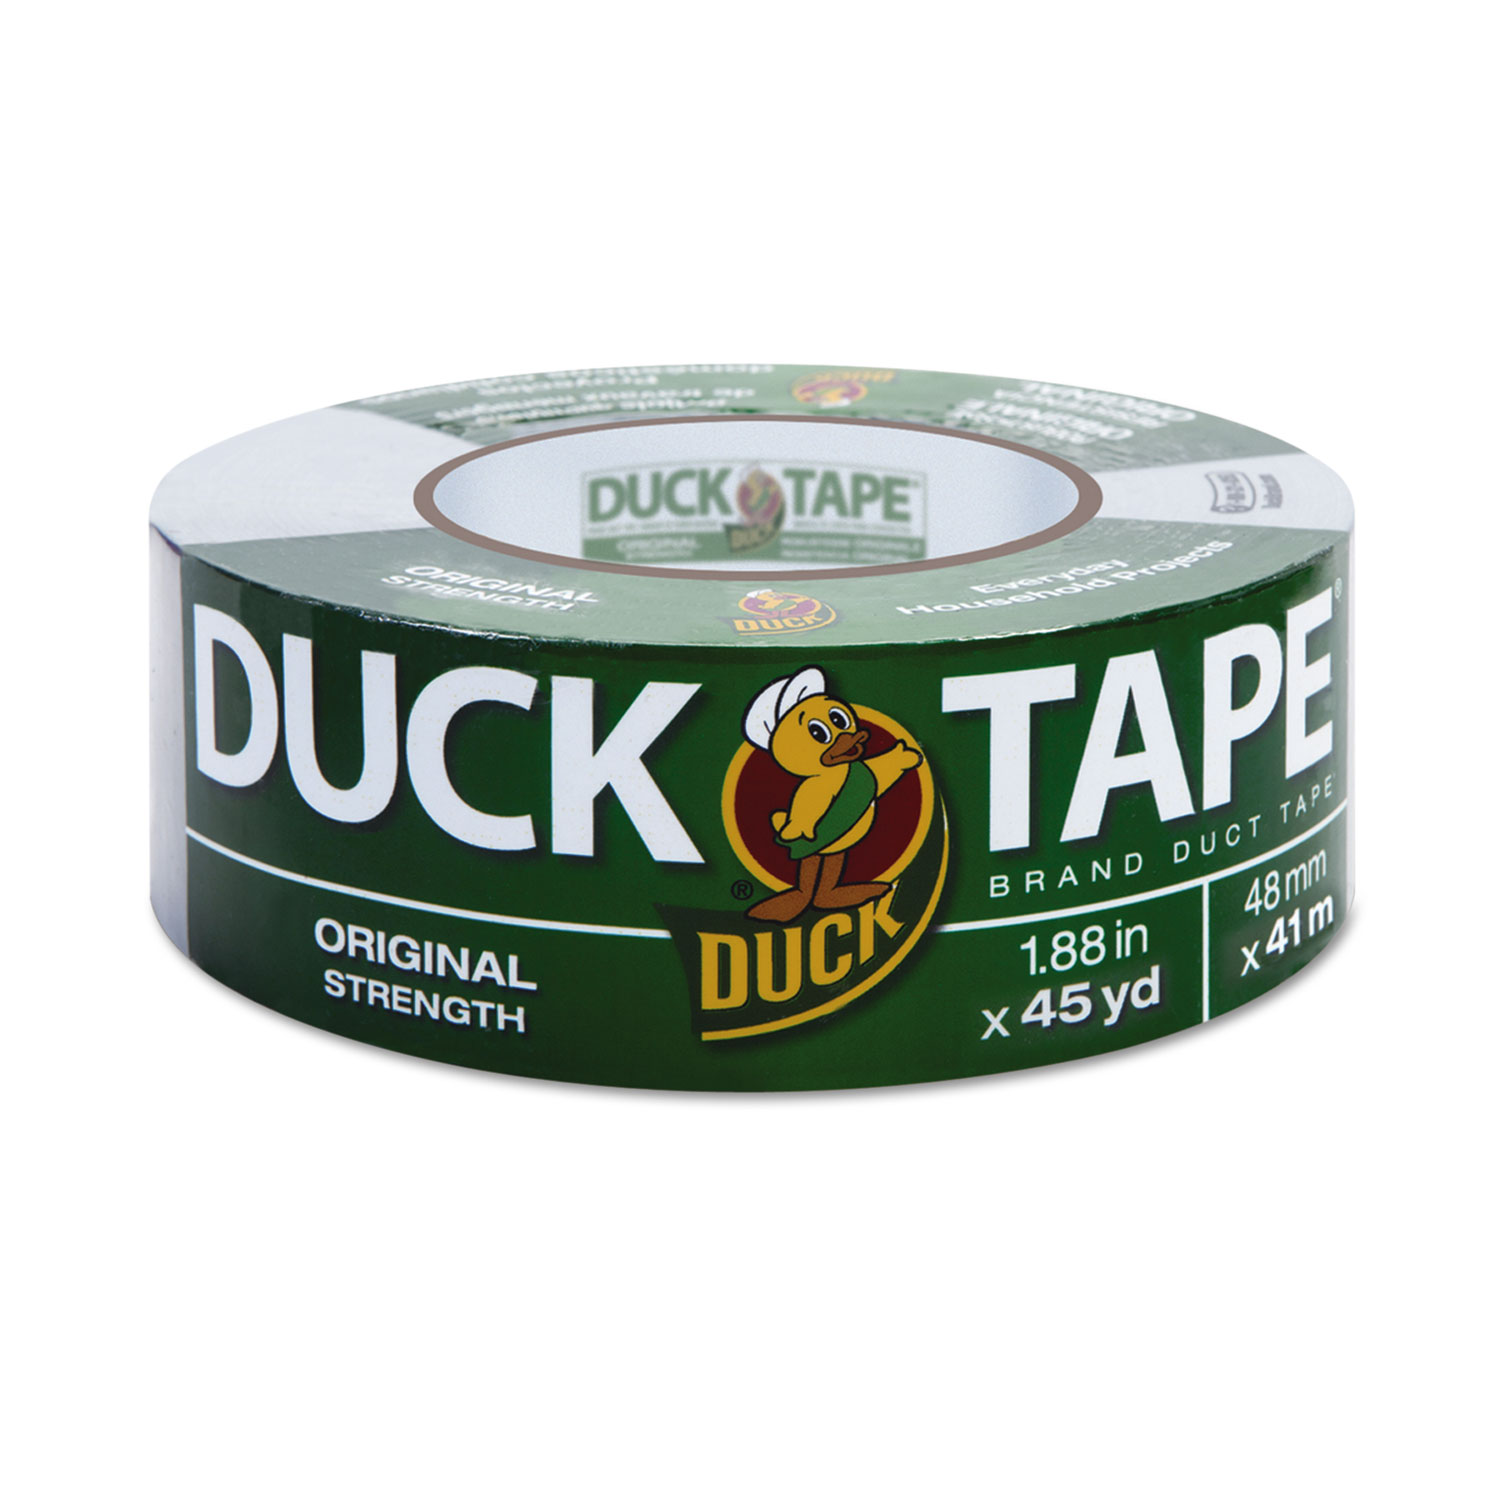 Brand Duct Tape, 1.88 x 45yds, 3 Core, Gray